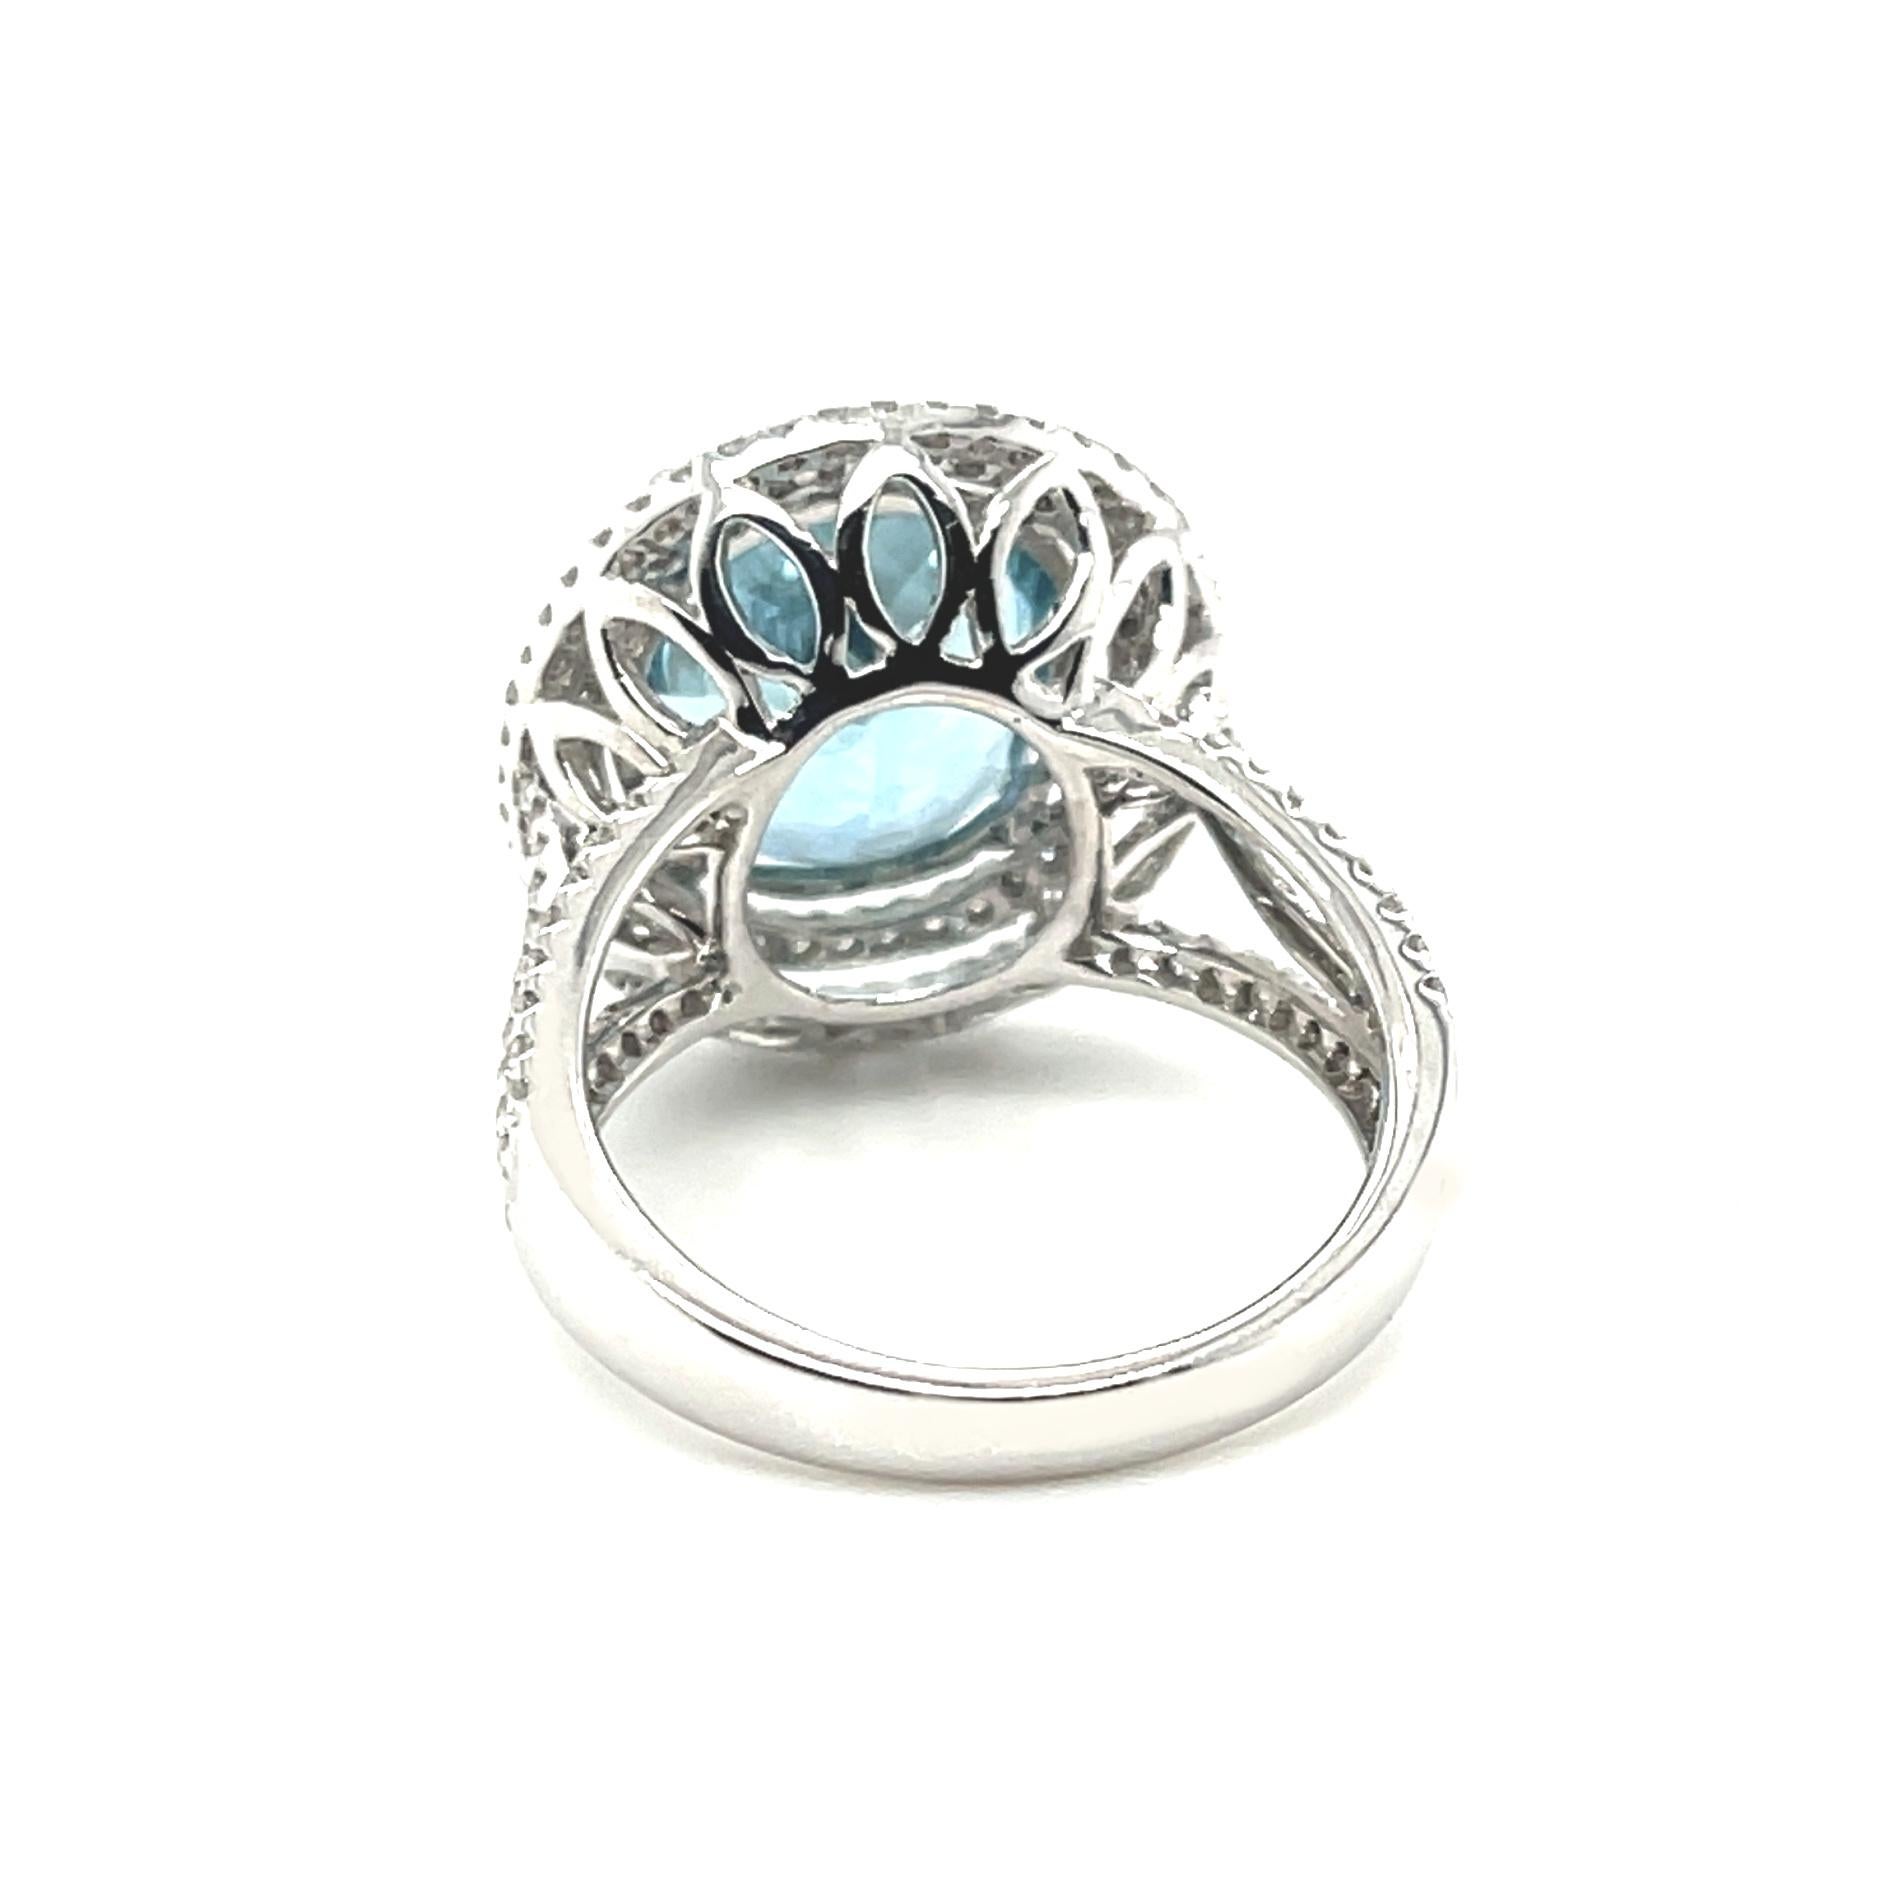 Aquamarine and Double Diamond Halo Cocktail Ring in White Gold, 5.52 Carats In New Condition For Sale In Los Angeles, CA